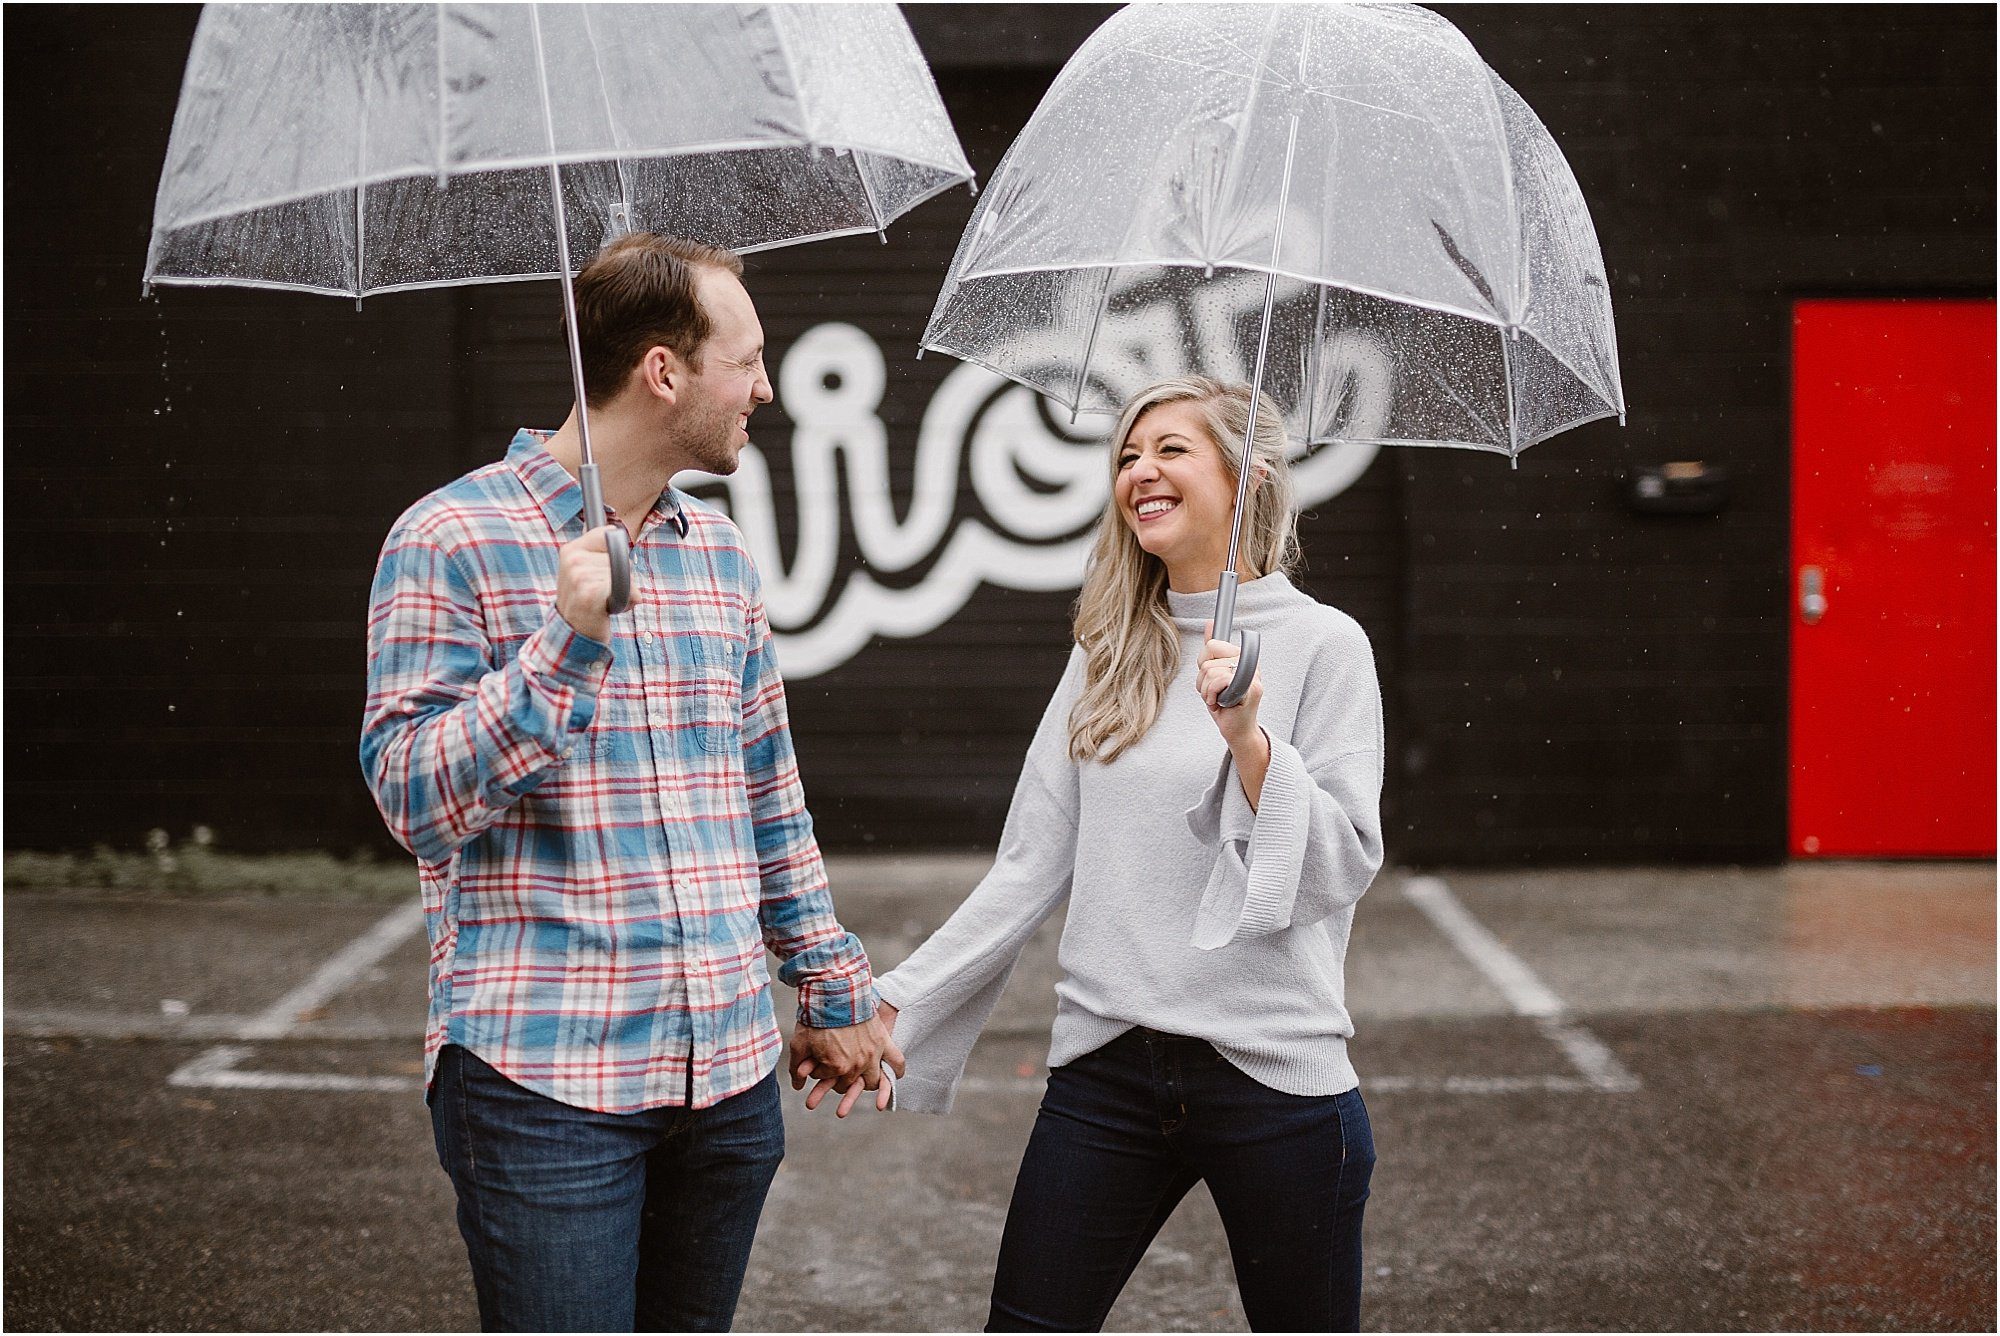 Rainy Day Industrial Engagement Photos in Knoxville | Photographed by Erin Morrison Photography | https://erinmorrisonphotography.com/rainy-day-industrial-engagement-photos-knoxville/